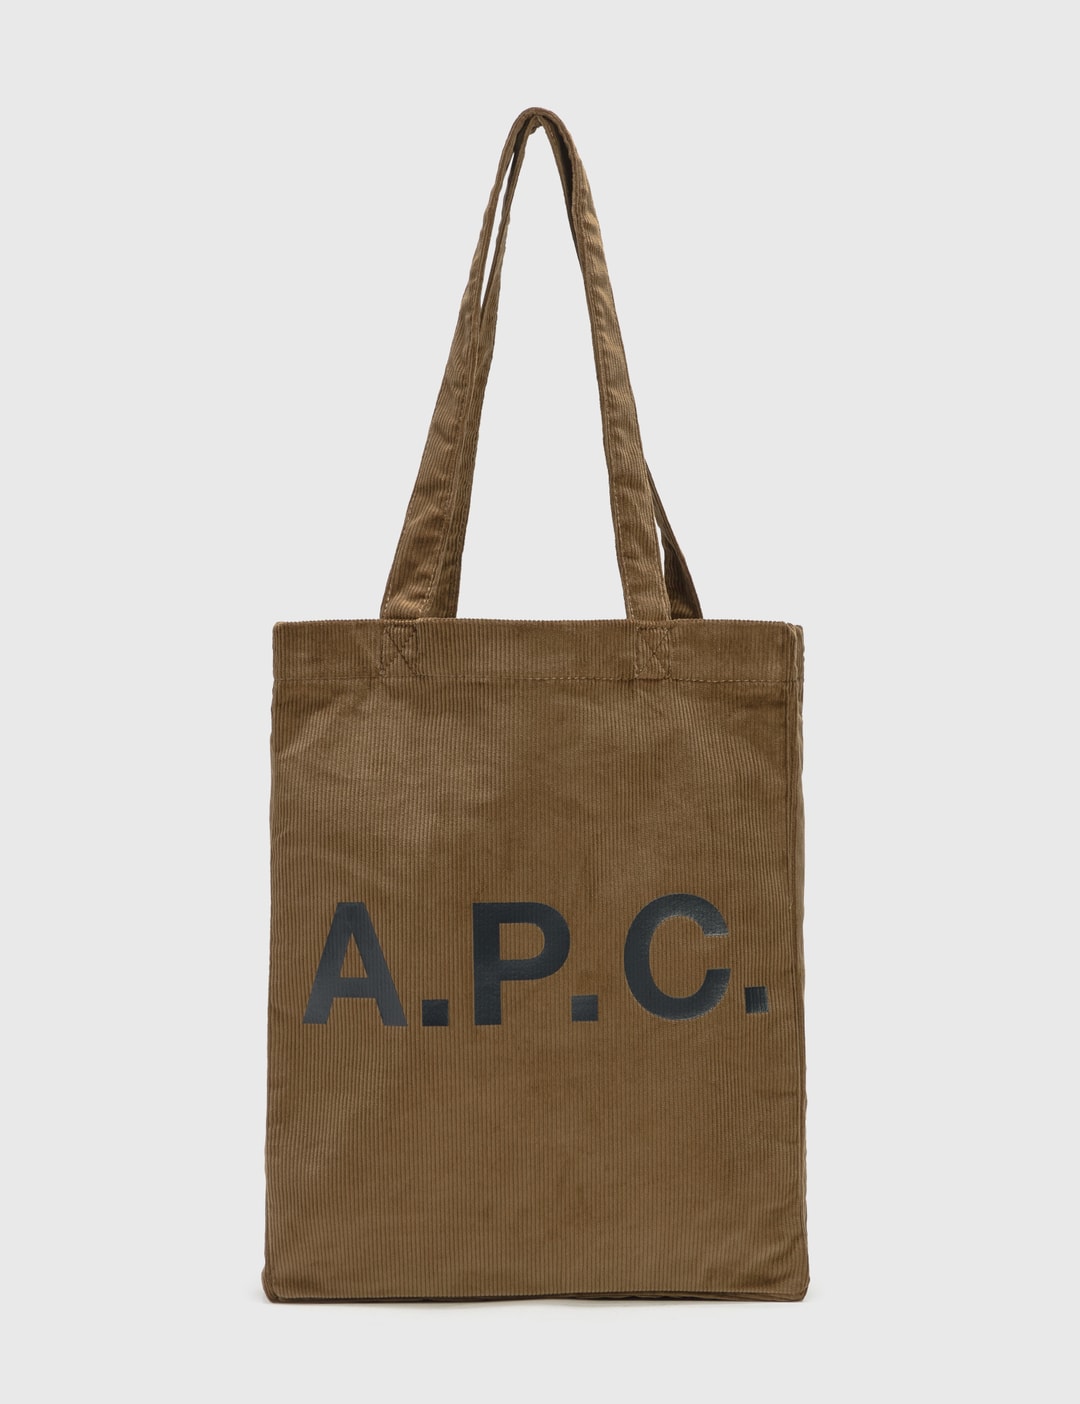 A.P.C. - Lou Tote Bag | HBX - Globally Curated Fashion and Lifestyle by ...